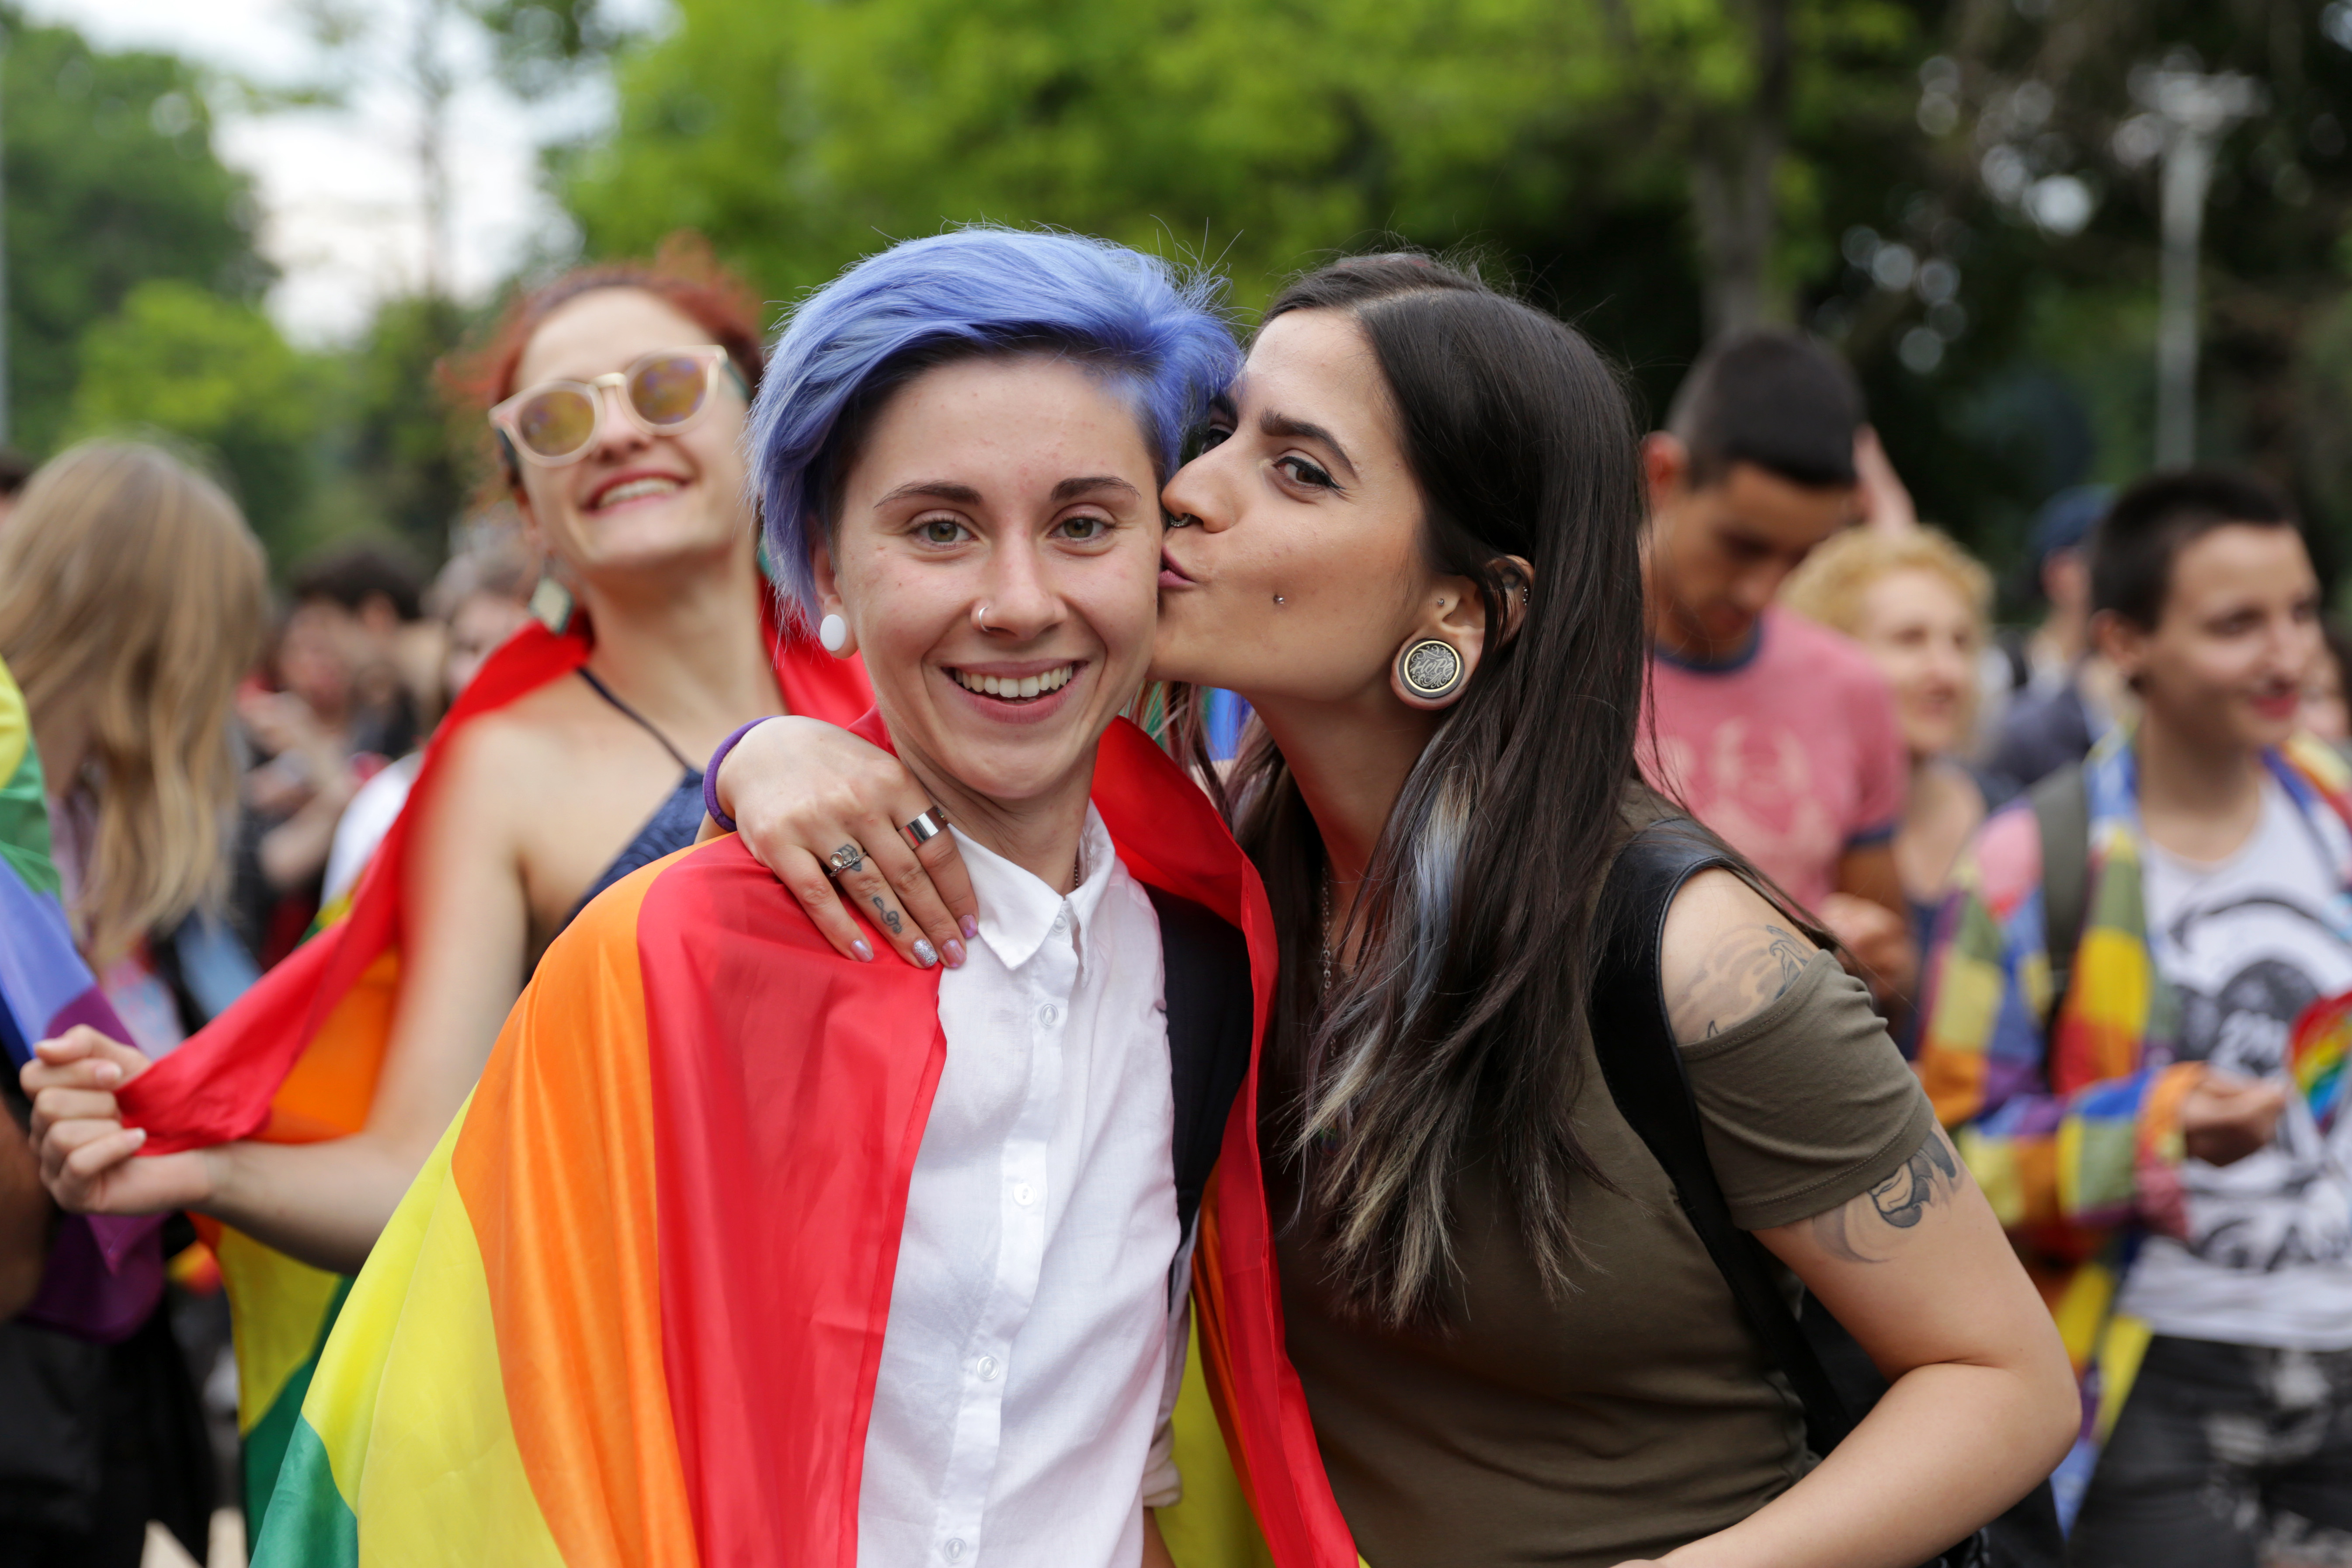 Two young and hip women with stylish outfits and hair smile for the camera and while one kisses the others' cheek. Her friend is wearing a pride flag.